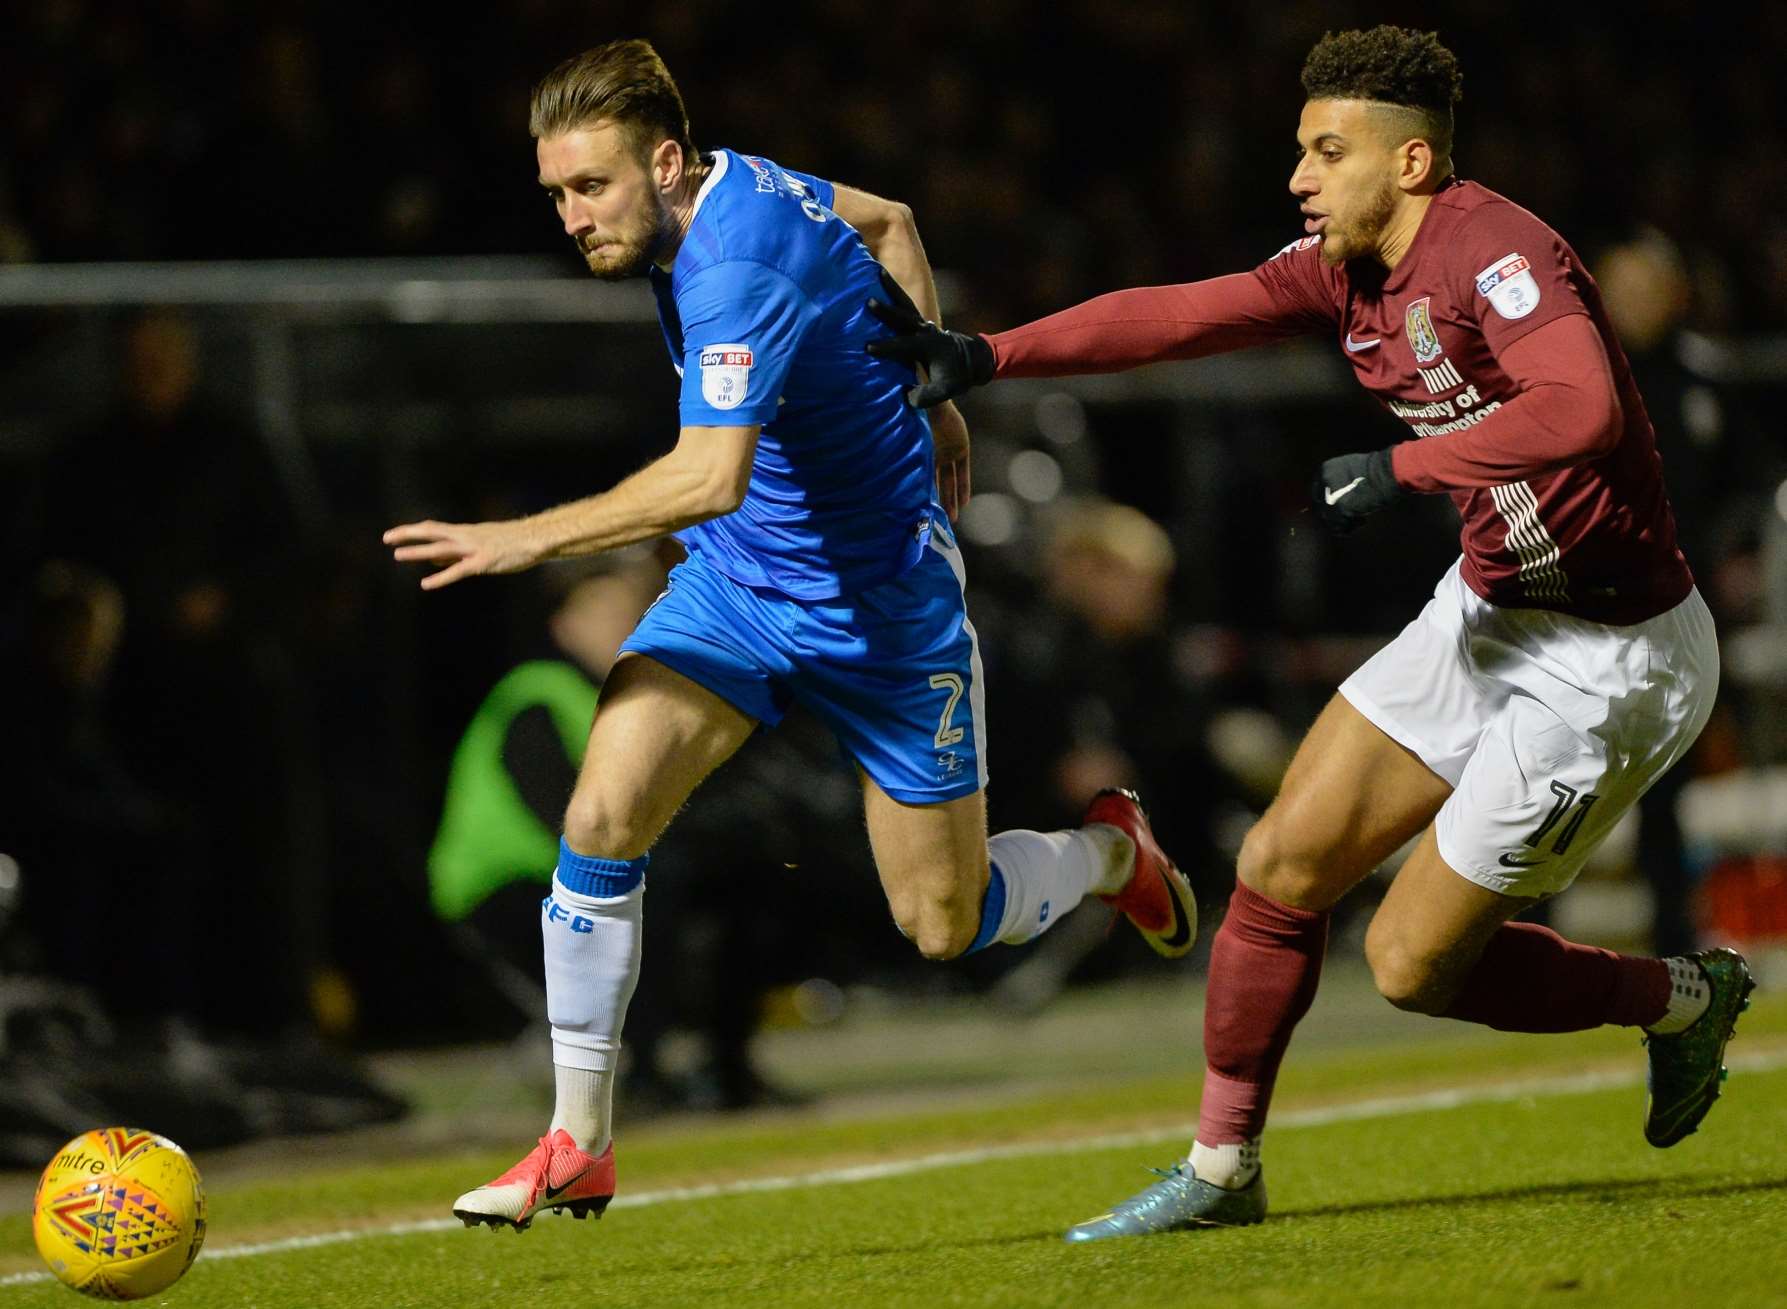 Luke O'Neill in action for Gills during the win at Northampton. Picture: Ady Kerry